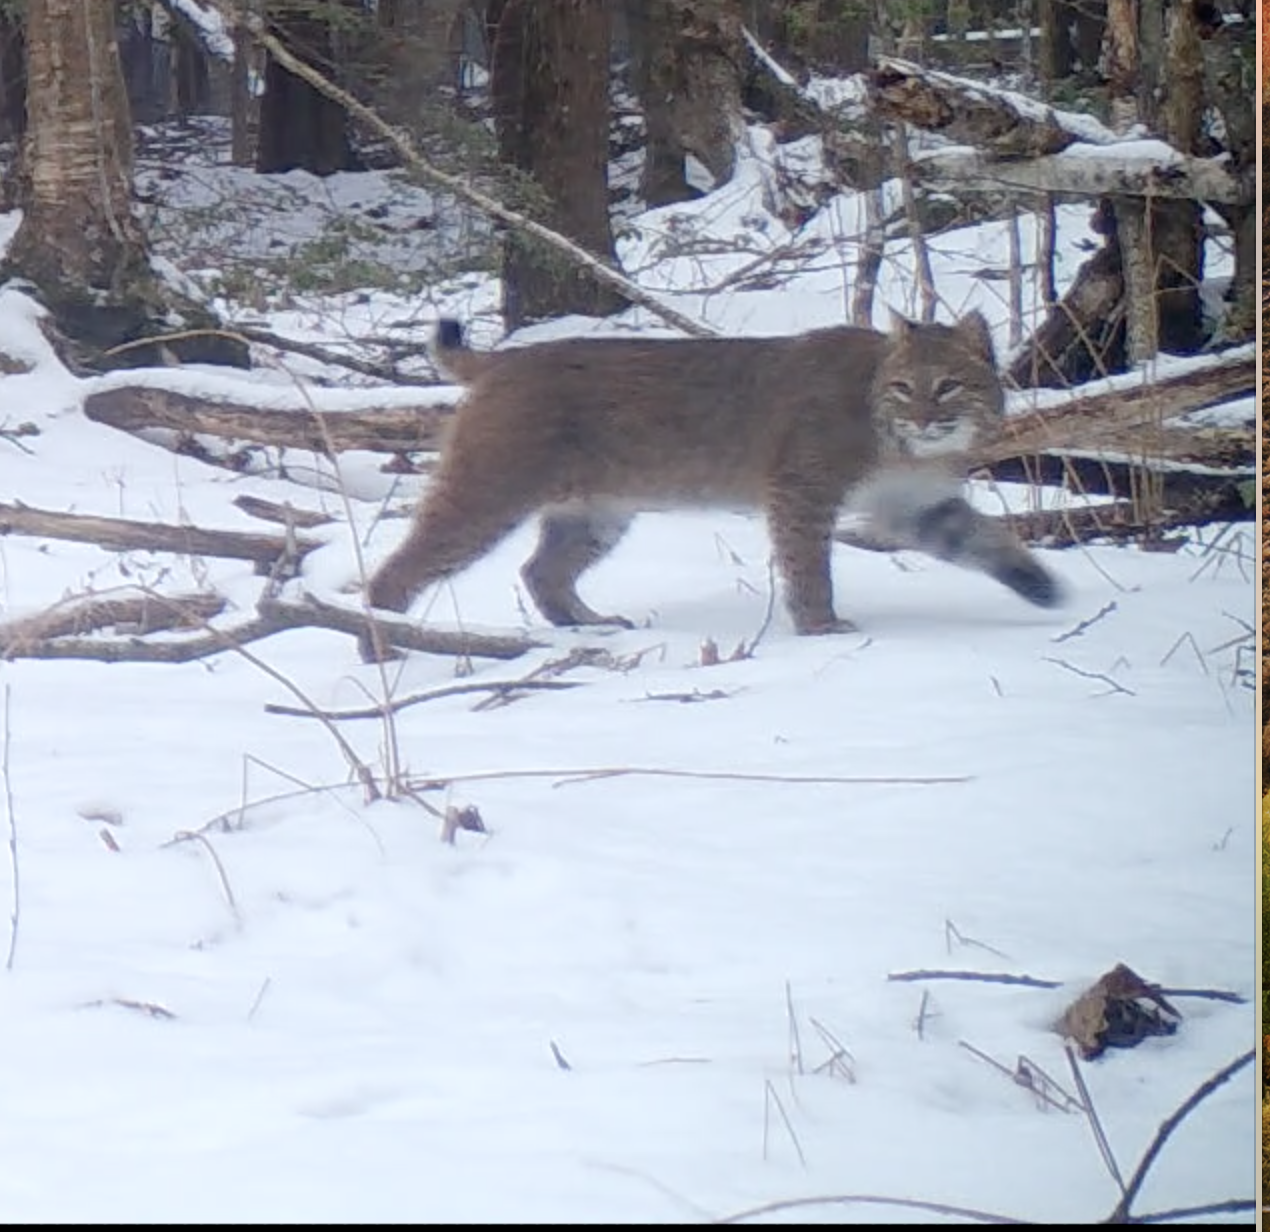   I apologize for the bad quality but this is a cool image……This is a screen shot from a trail camera video in our backyard last night.  Its a bobcat thats been hunting squirrels in our backyard.  